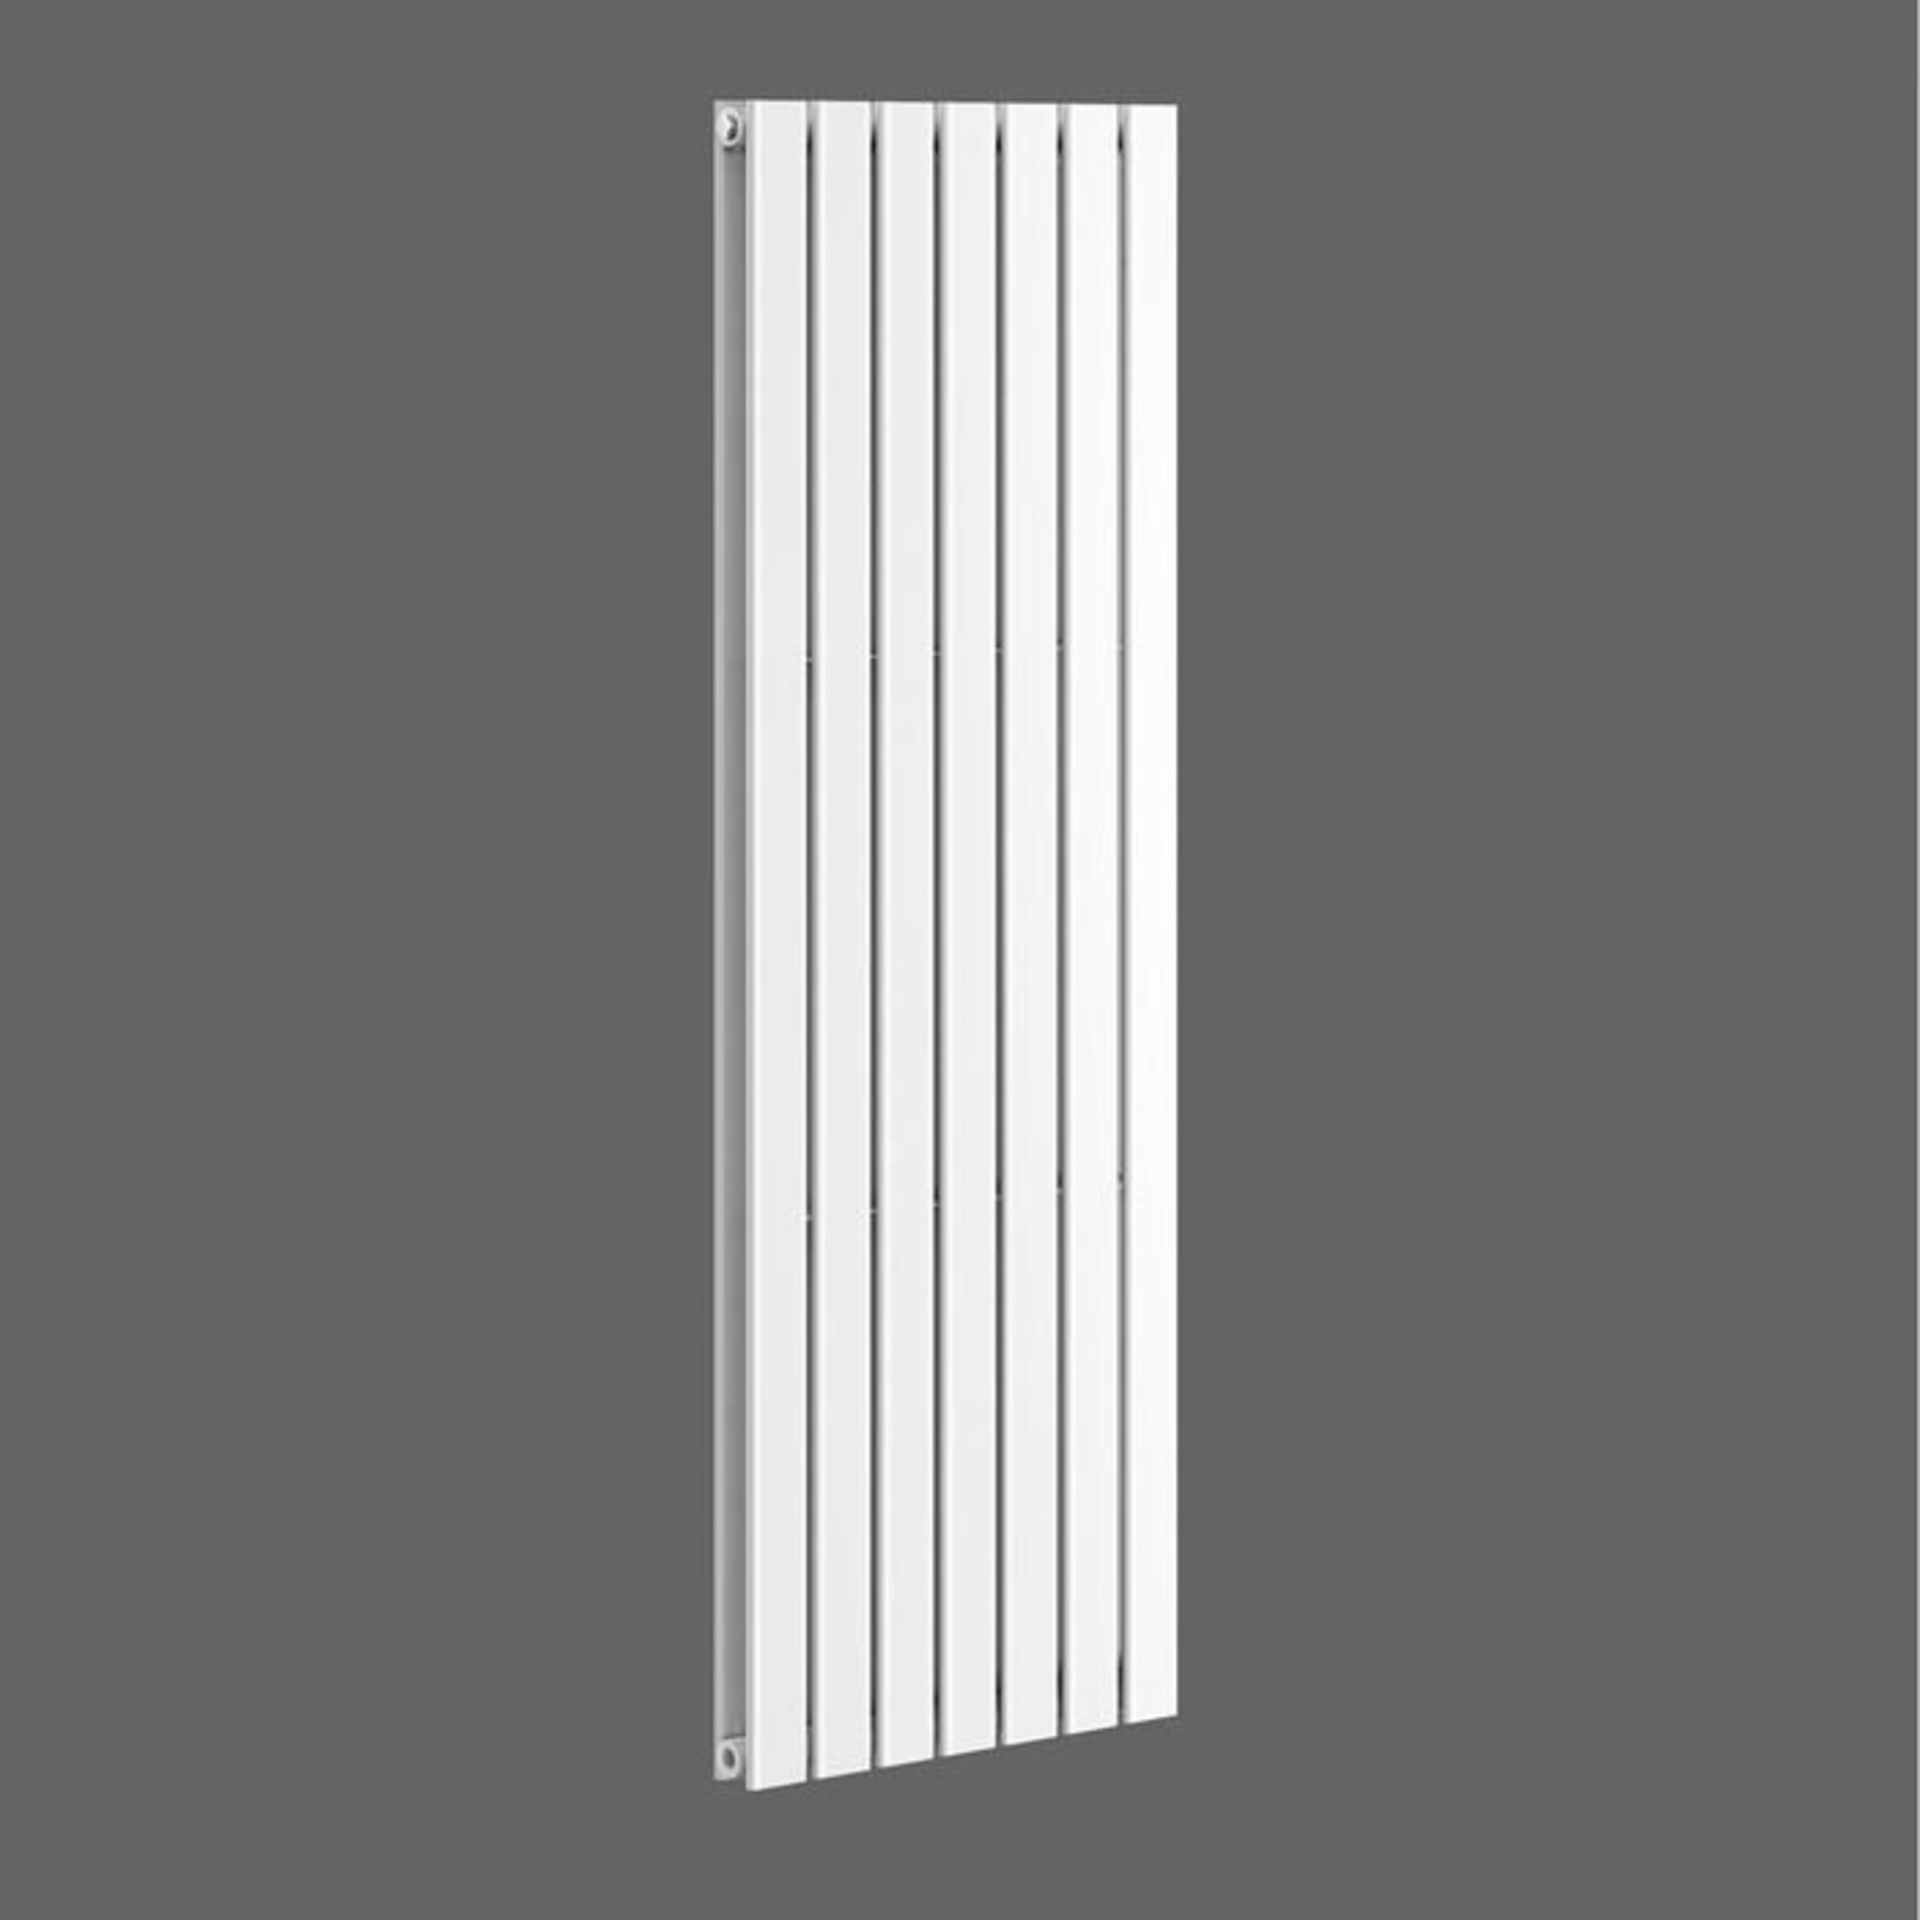 (S67) 1800x532mm Gloss White Double Flat Panel Vertical Radiator RRP £599.99 Low carbon steel, - Image 3 of 3